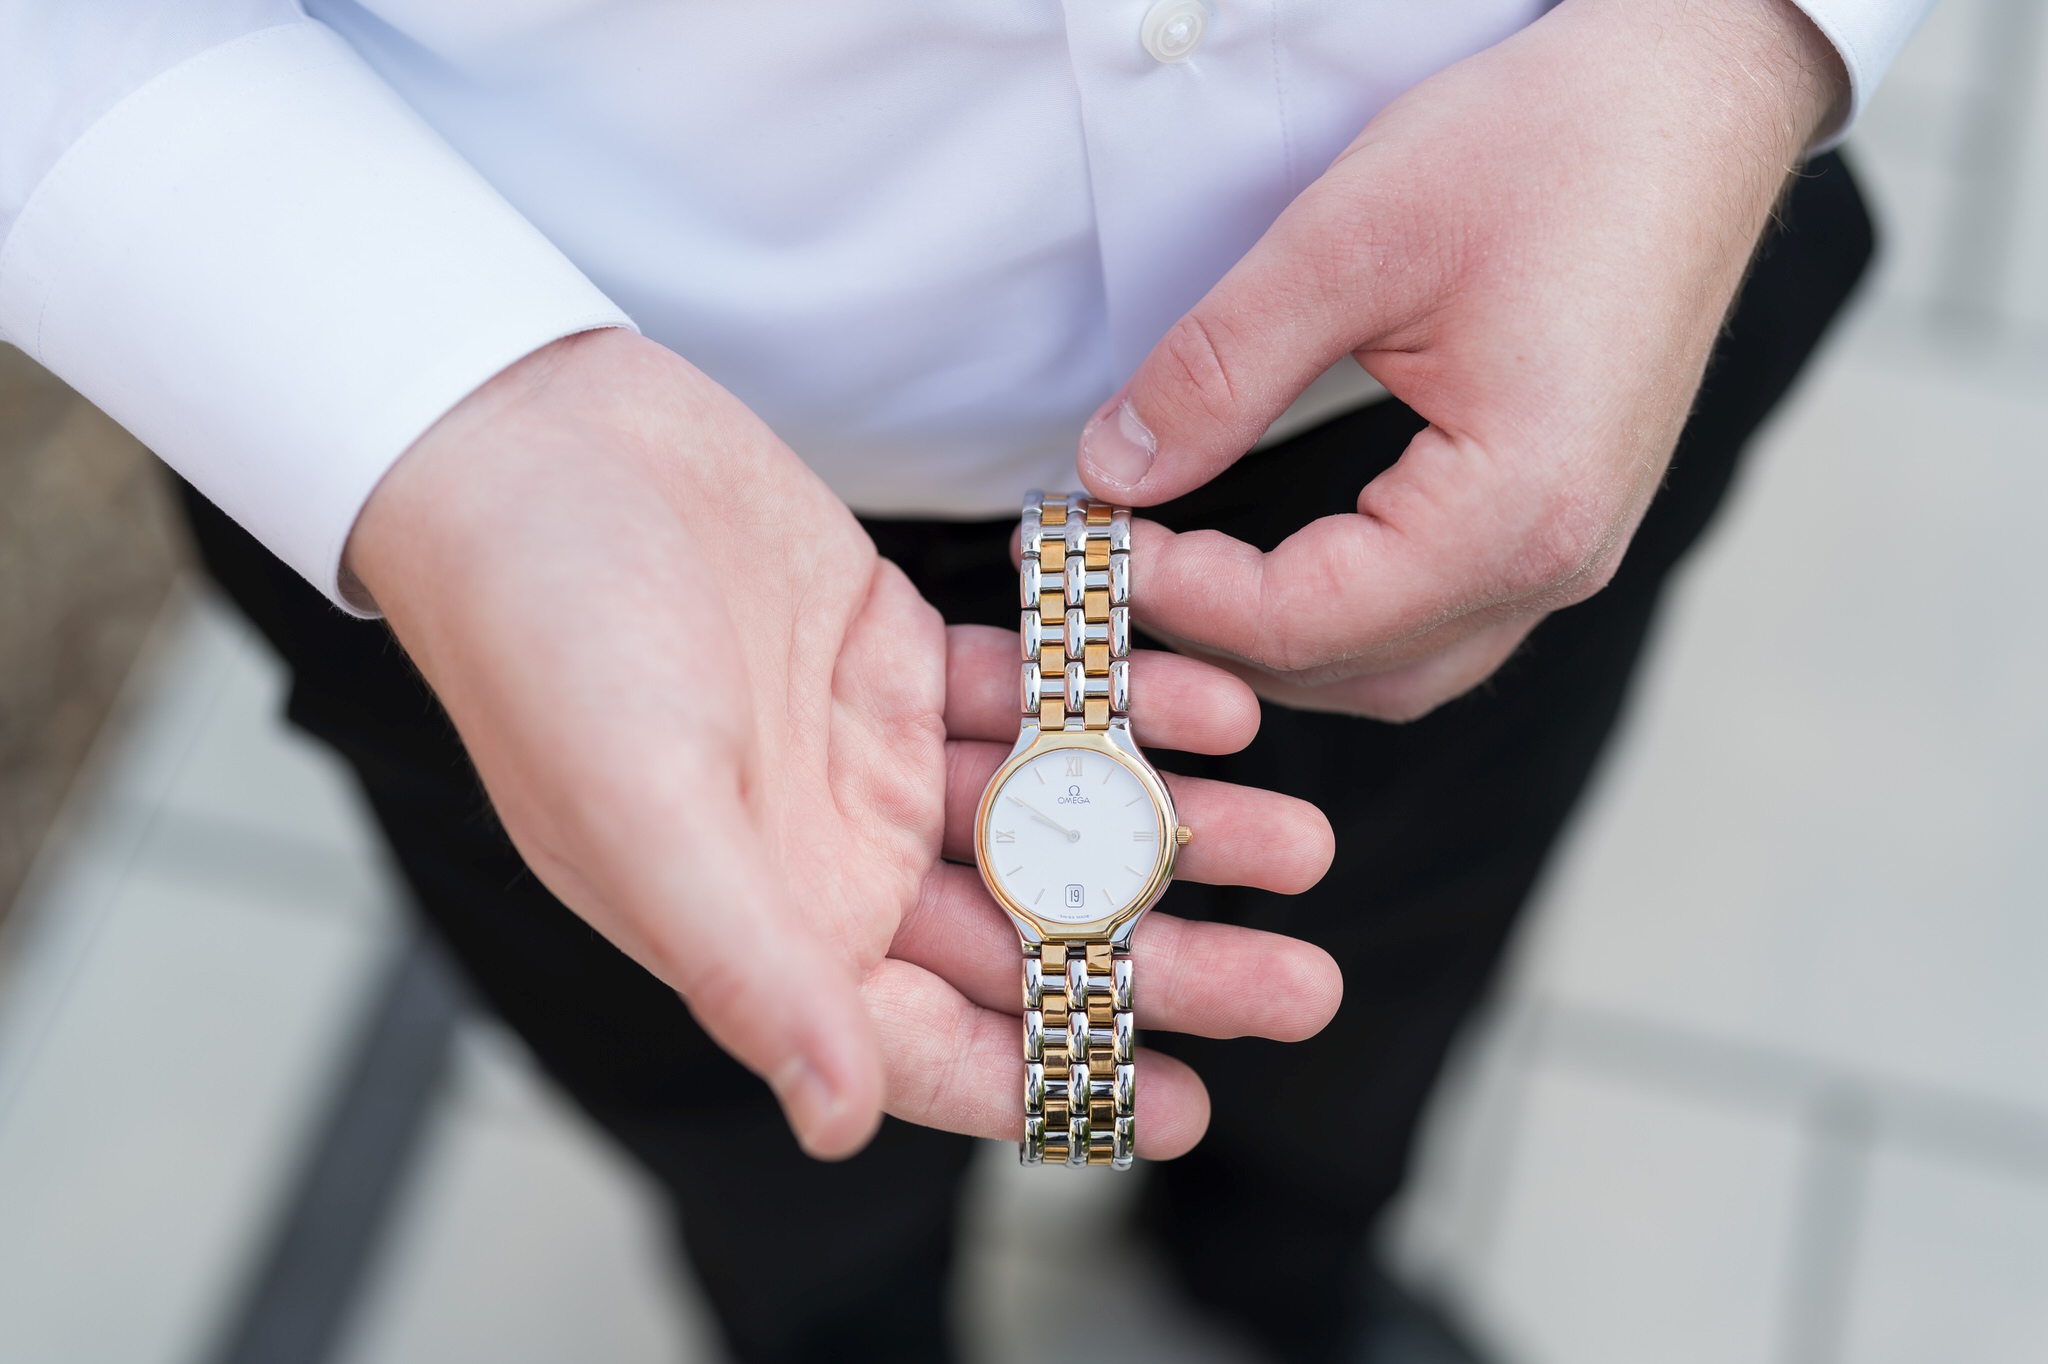 A groom shows an Omega watch.